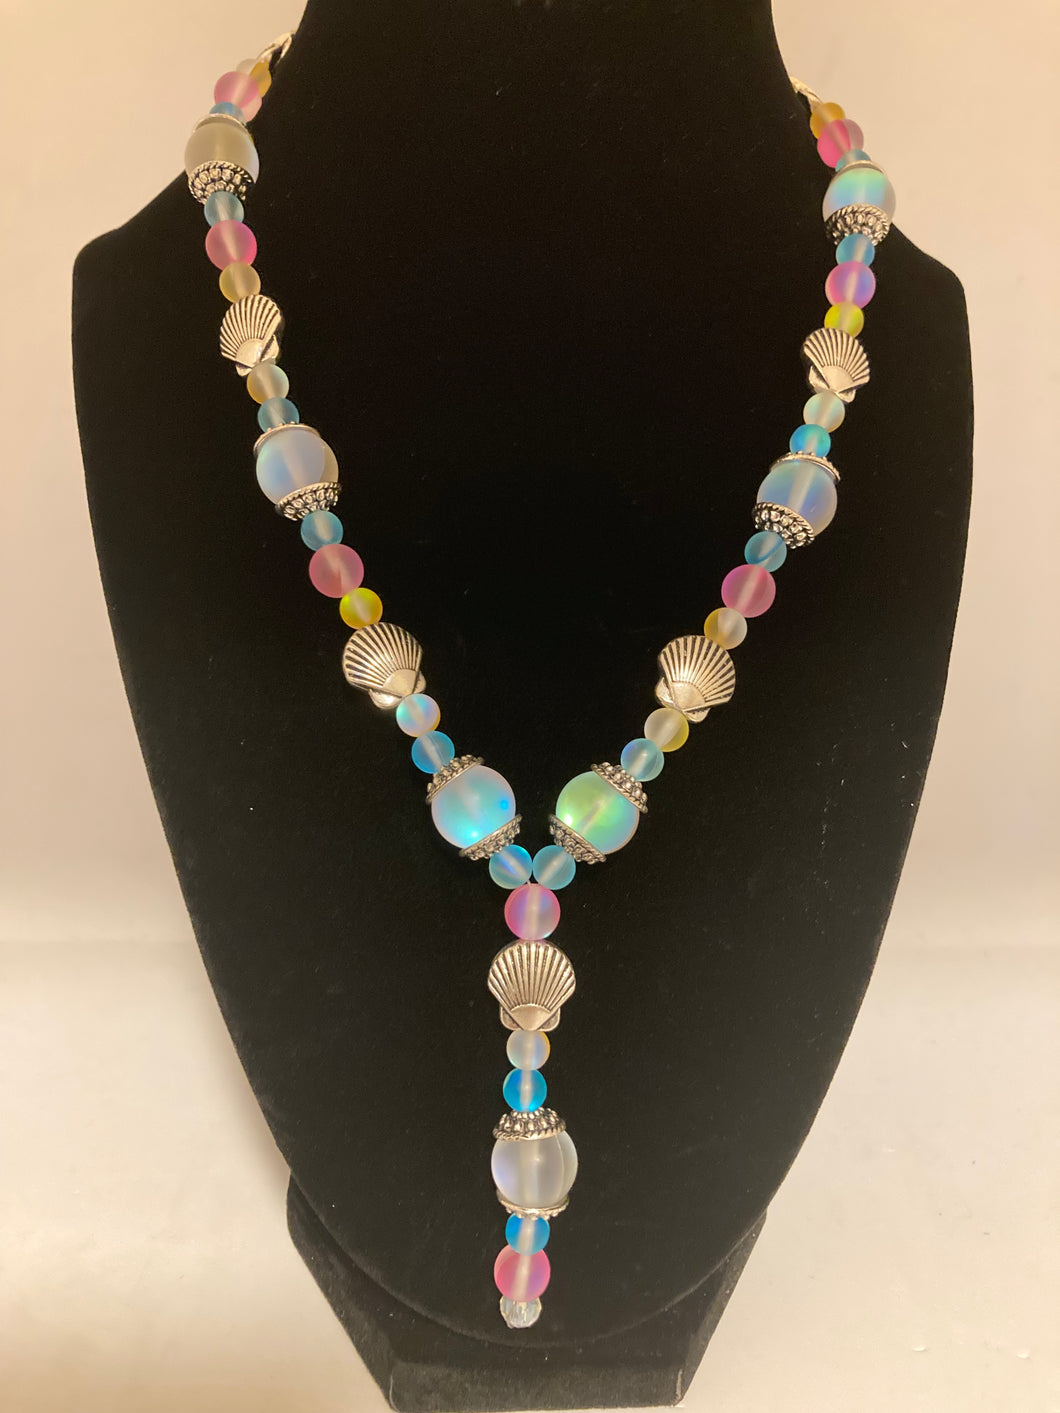 Multi-color pastel necklace with dangling earrings,